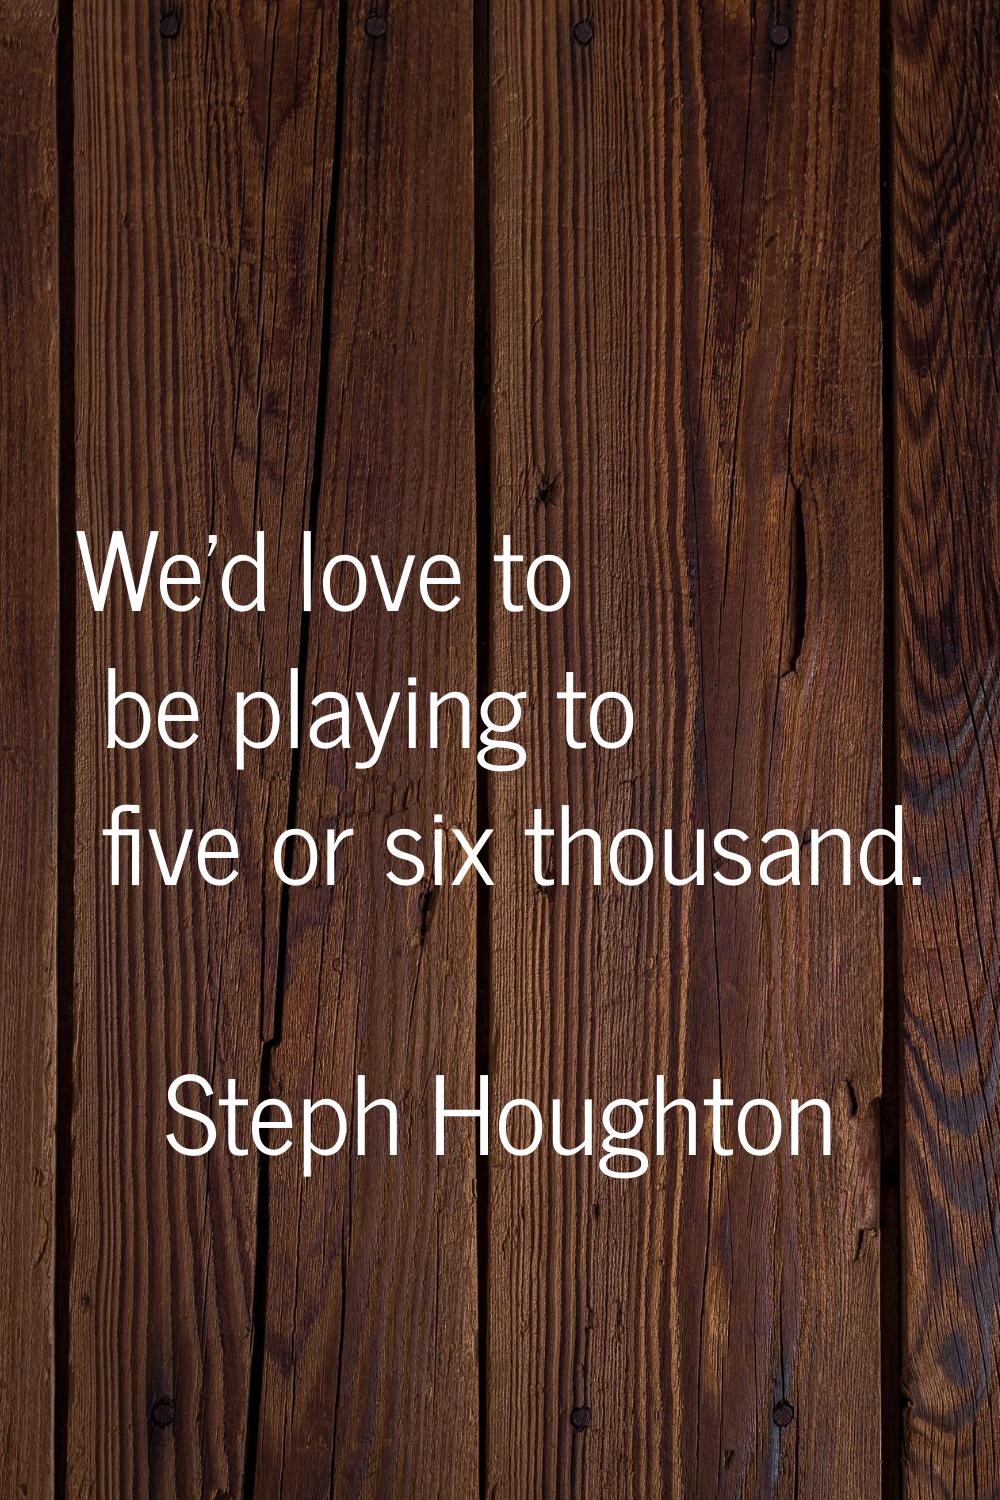 We'd love to be playing to five or six thousand.